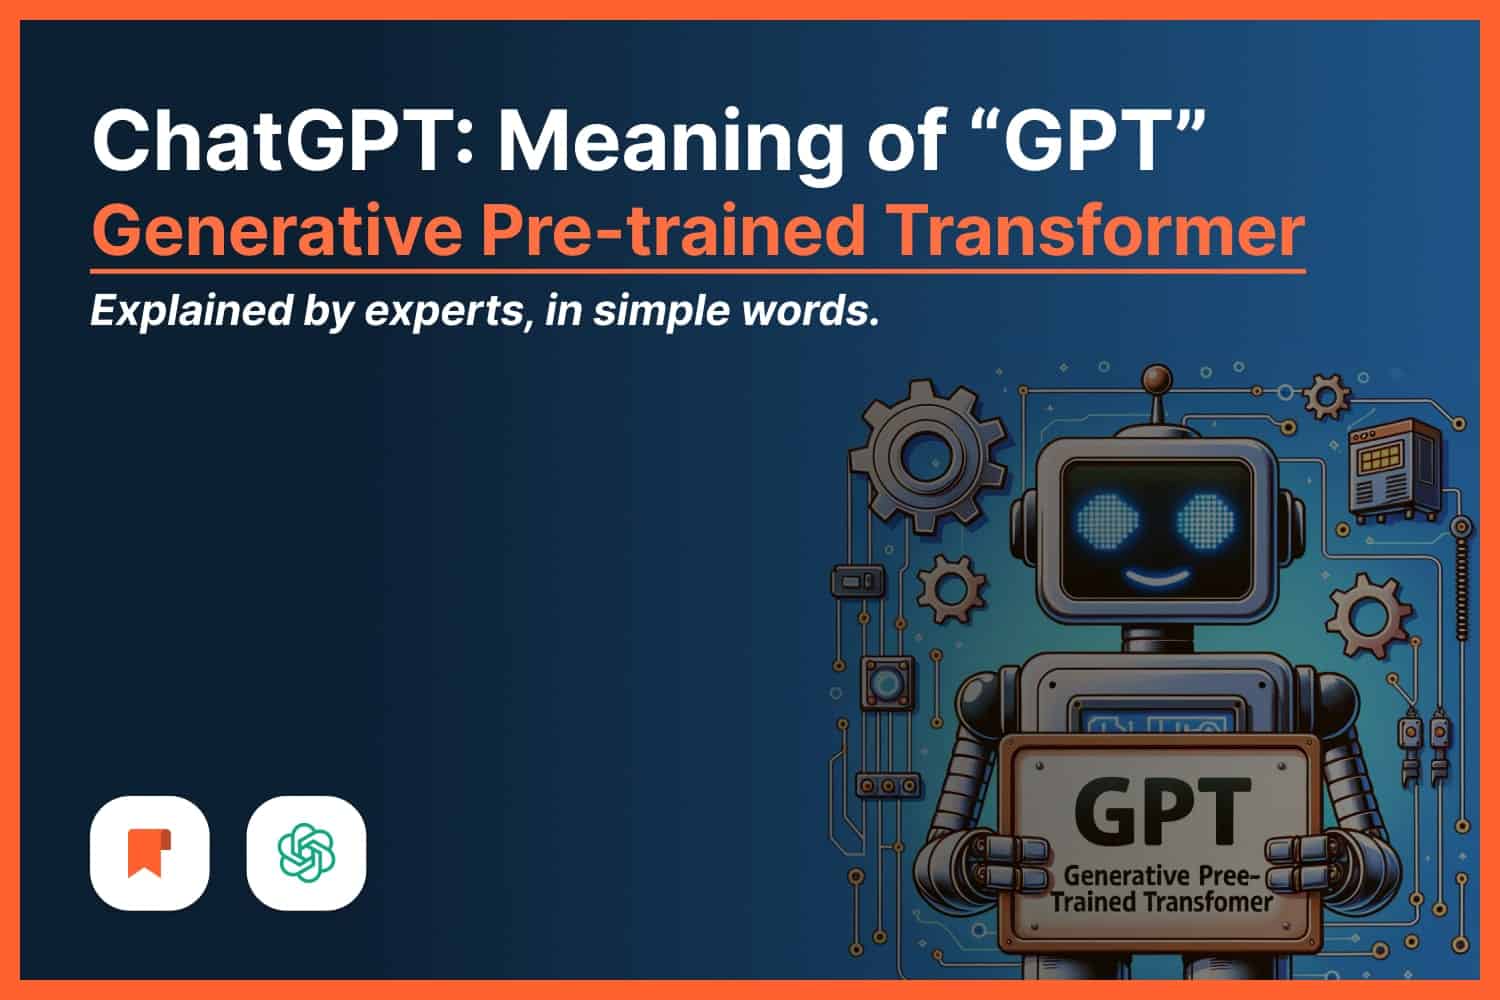 Explaining what GPT stands for in ChatGPT